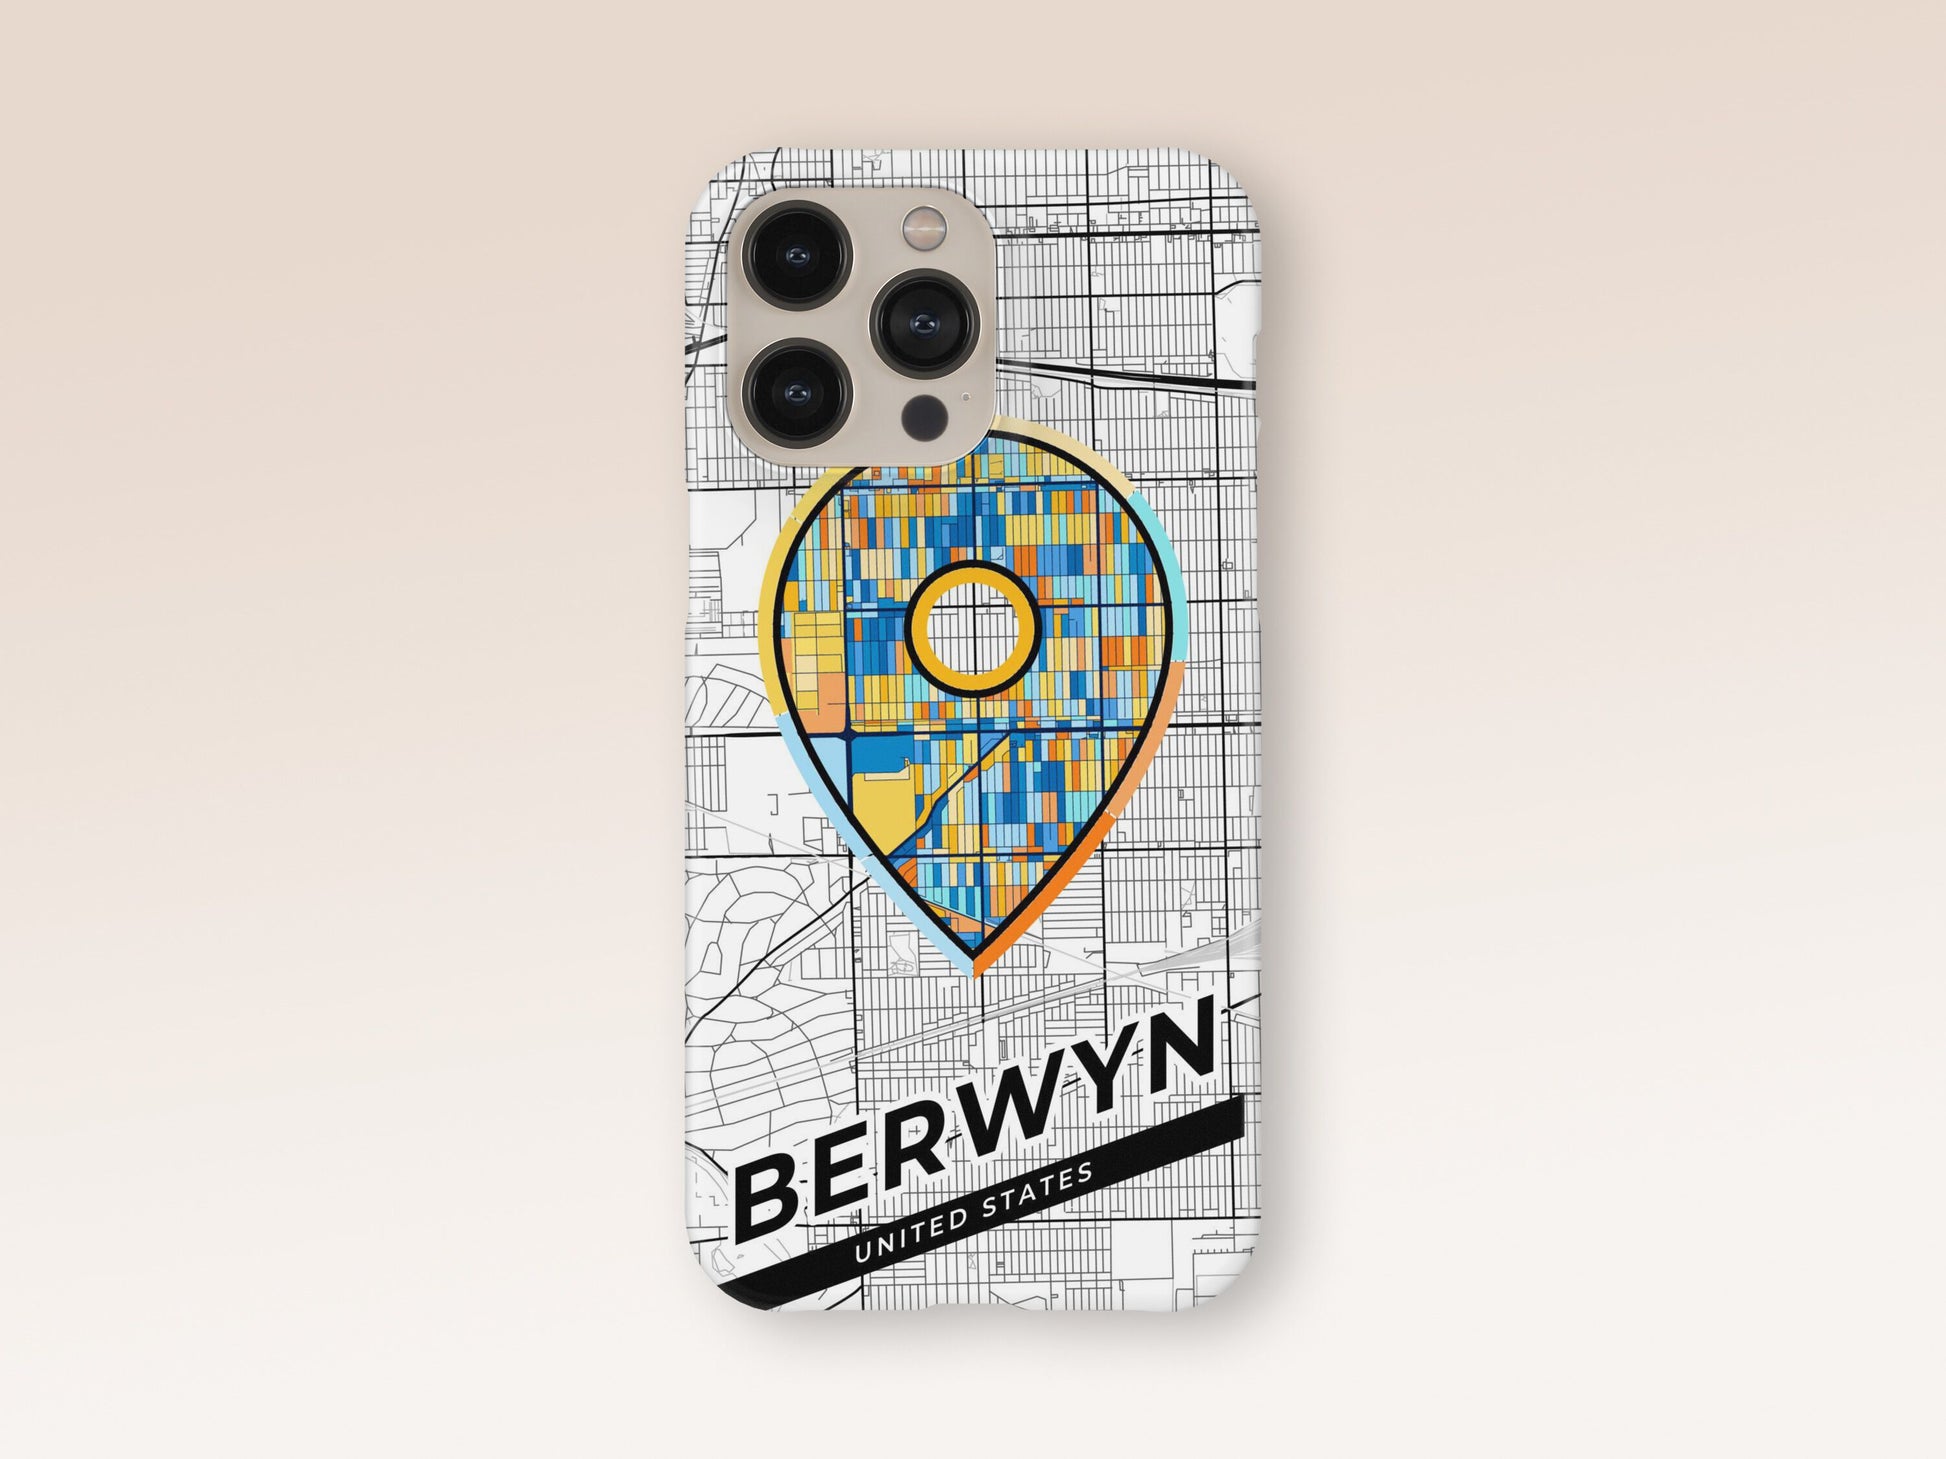 Berwyn Illinois slim phone case with colorful icon. Birthday, wedding or housewarming gift. Couple match cases. 1